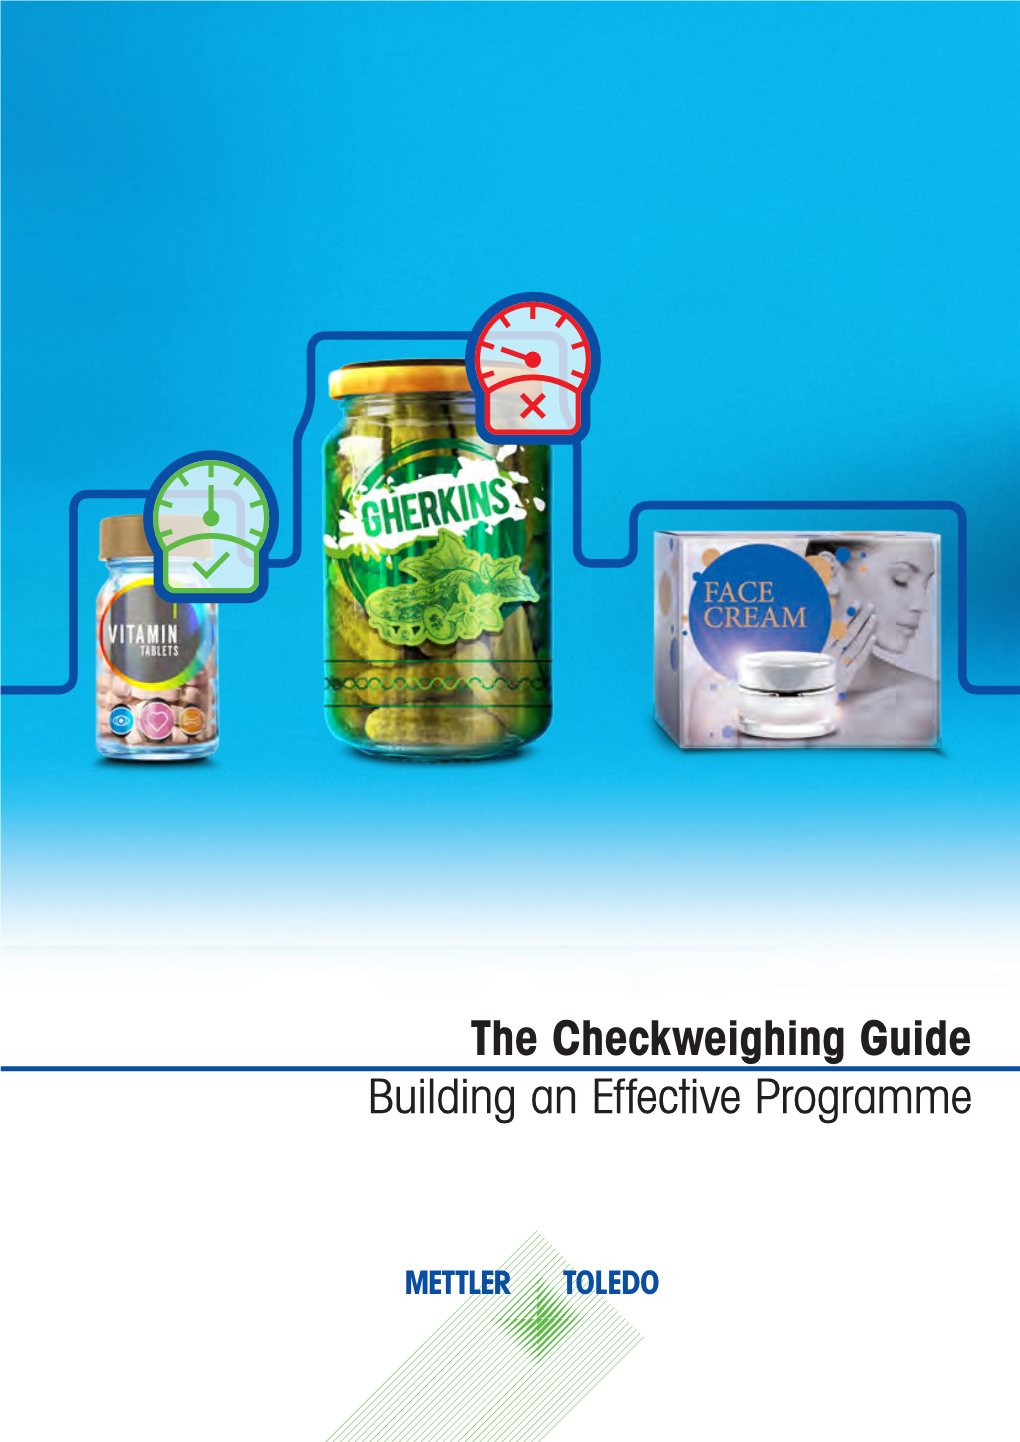 The Checkweighing Guide Building an Effective Programme